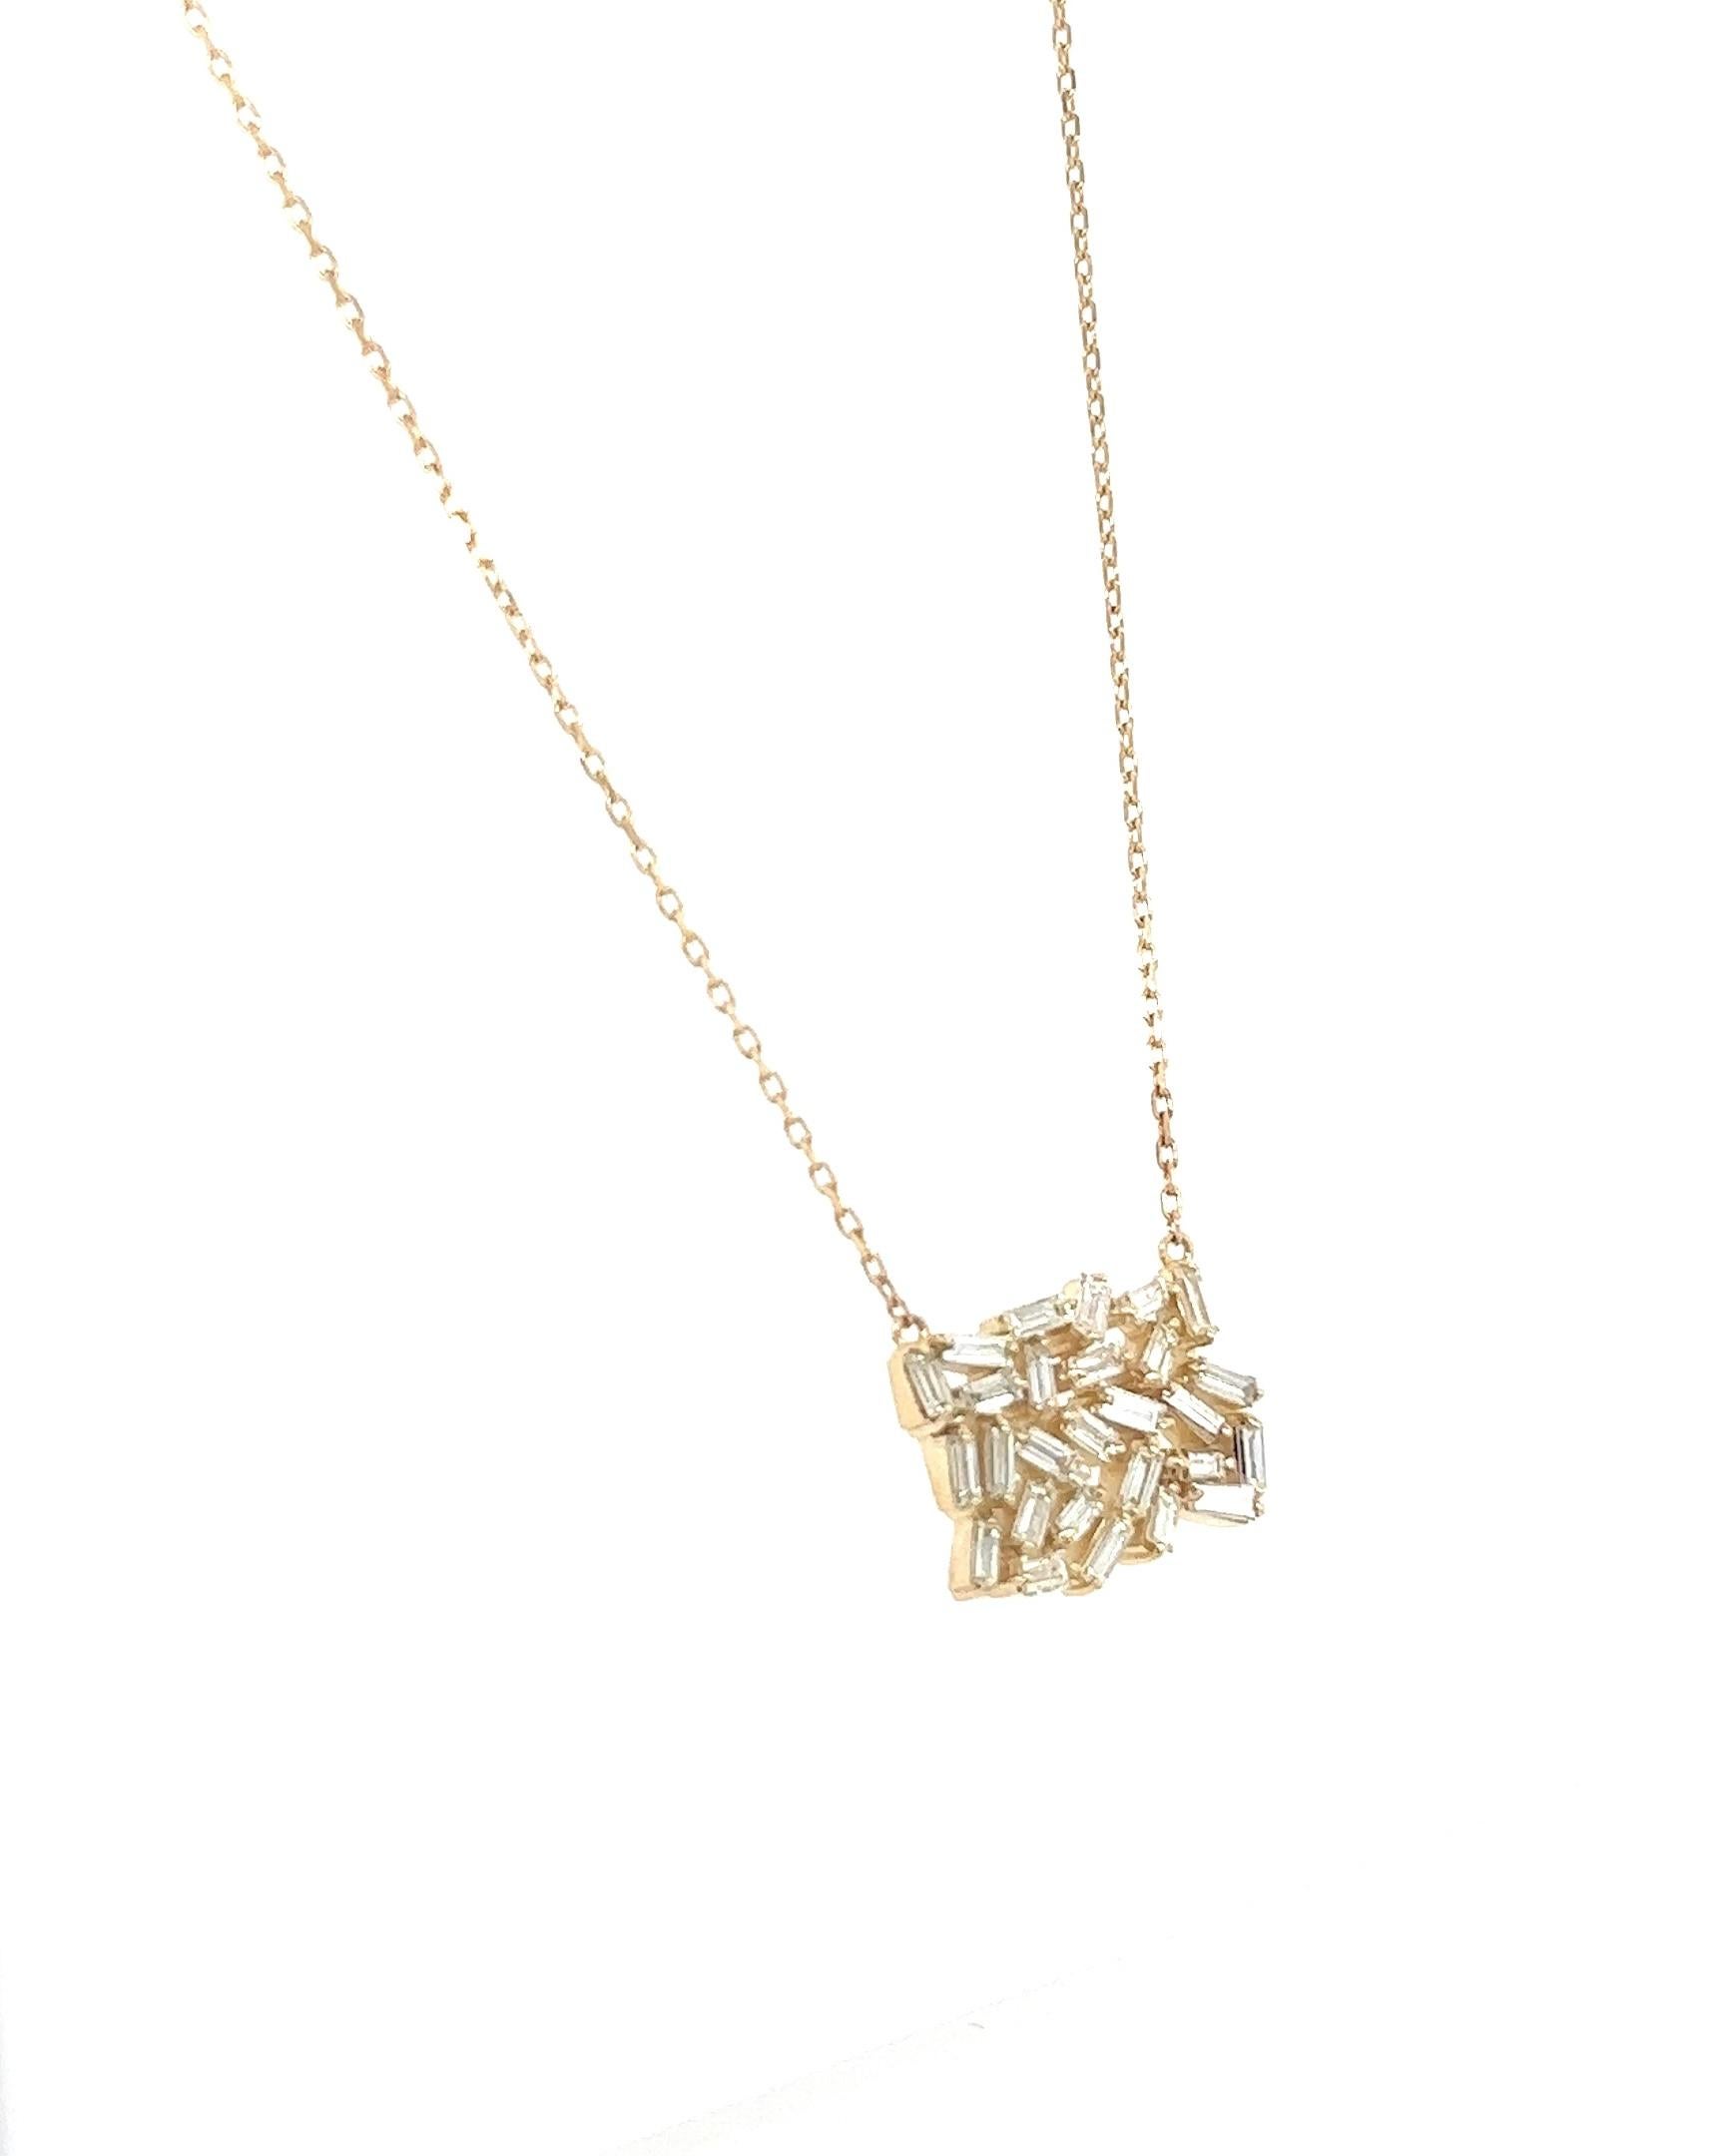 This necklace has Natural Tapered Baguette Cut Diamonds that weigh 0.95 carats. The clarity and color is: VS-I. 

The necklace is 16 inches long. 

The shape of the necklace is of a rectangle and sits very well. 

Curated in 14 Karat Yellow Gold and